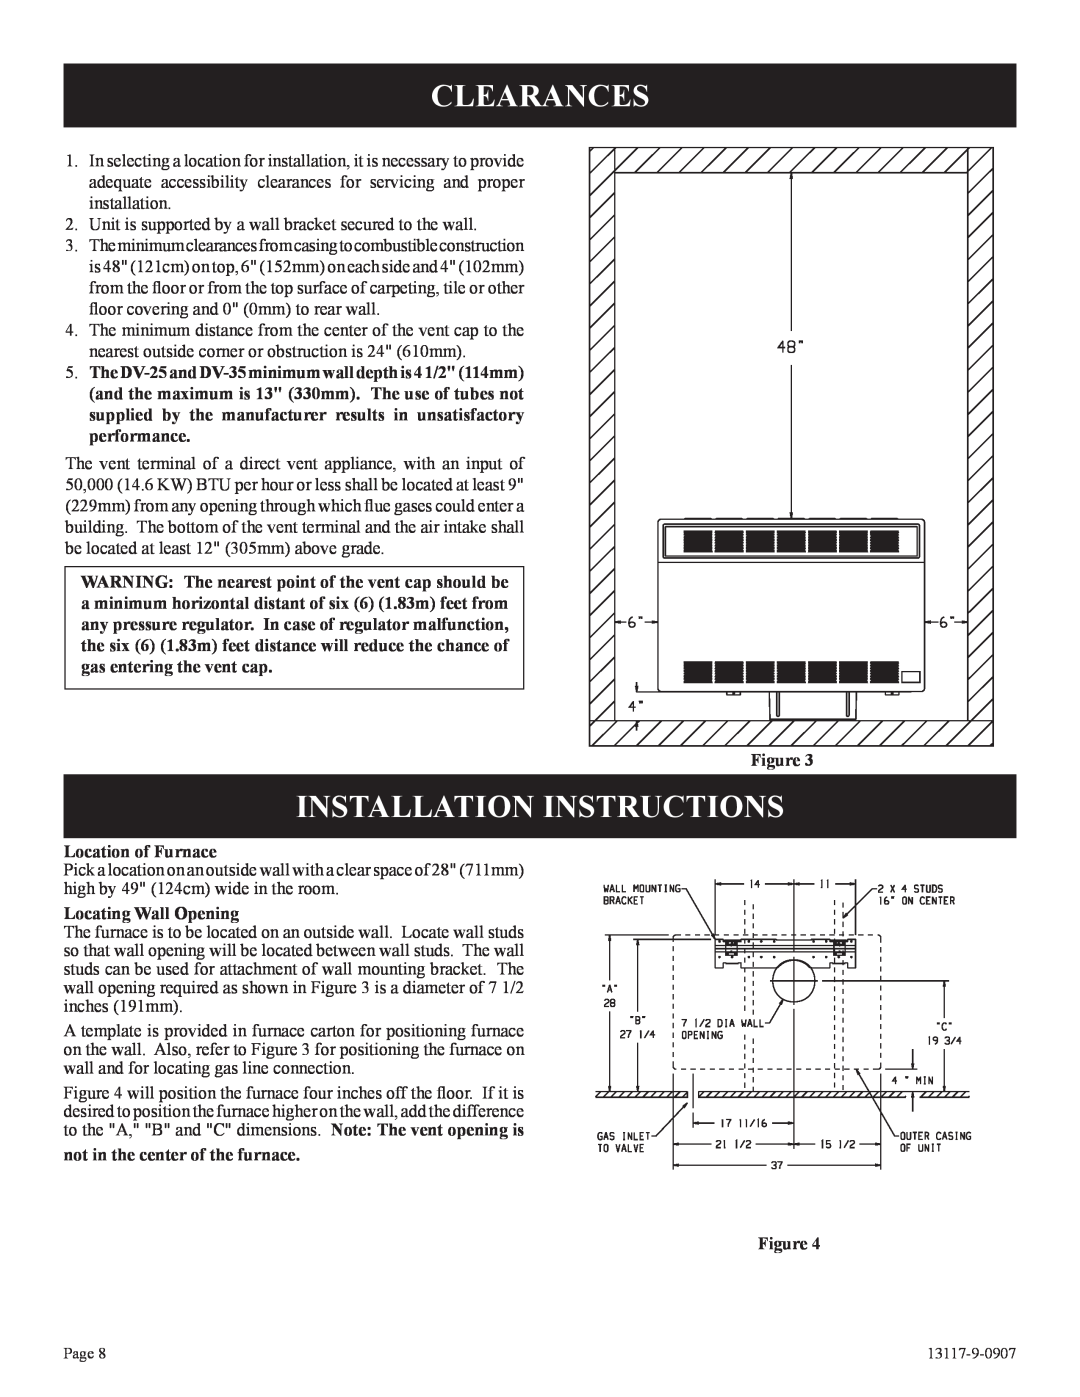 Empire Products DV-35T-1, DV-25T-1 Clearances, Installation Instructions, Location of Furnace, Locating Wall Opening 